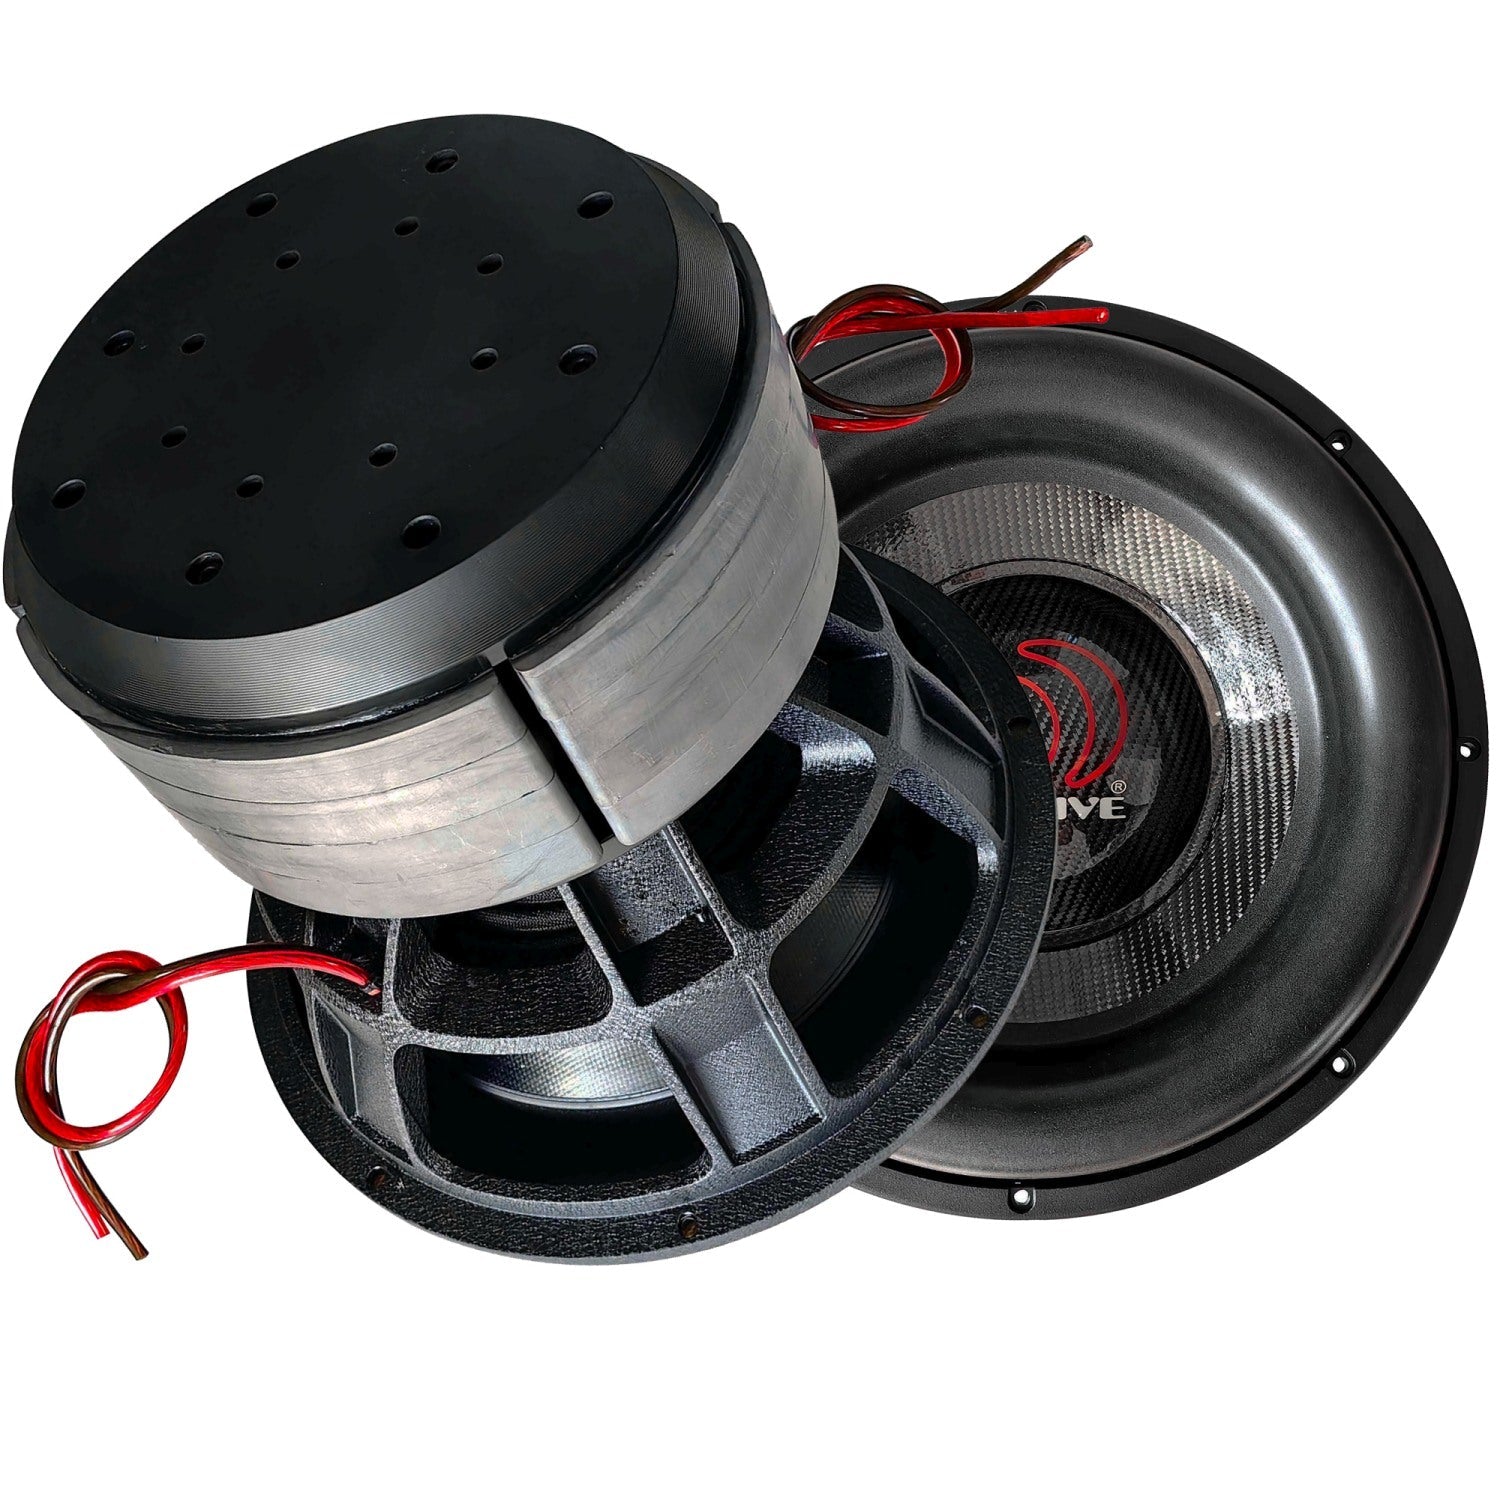 BOA152R - 15" 8,000 Watts RMS Dual 2 Ohm Mega Subwoofer - Caution* Product is 132 Lbs. and Requires Special Handling (Copy)